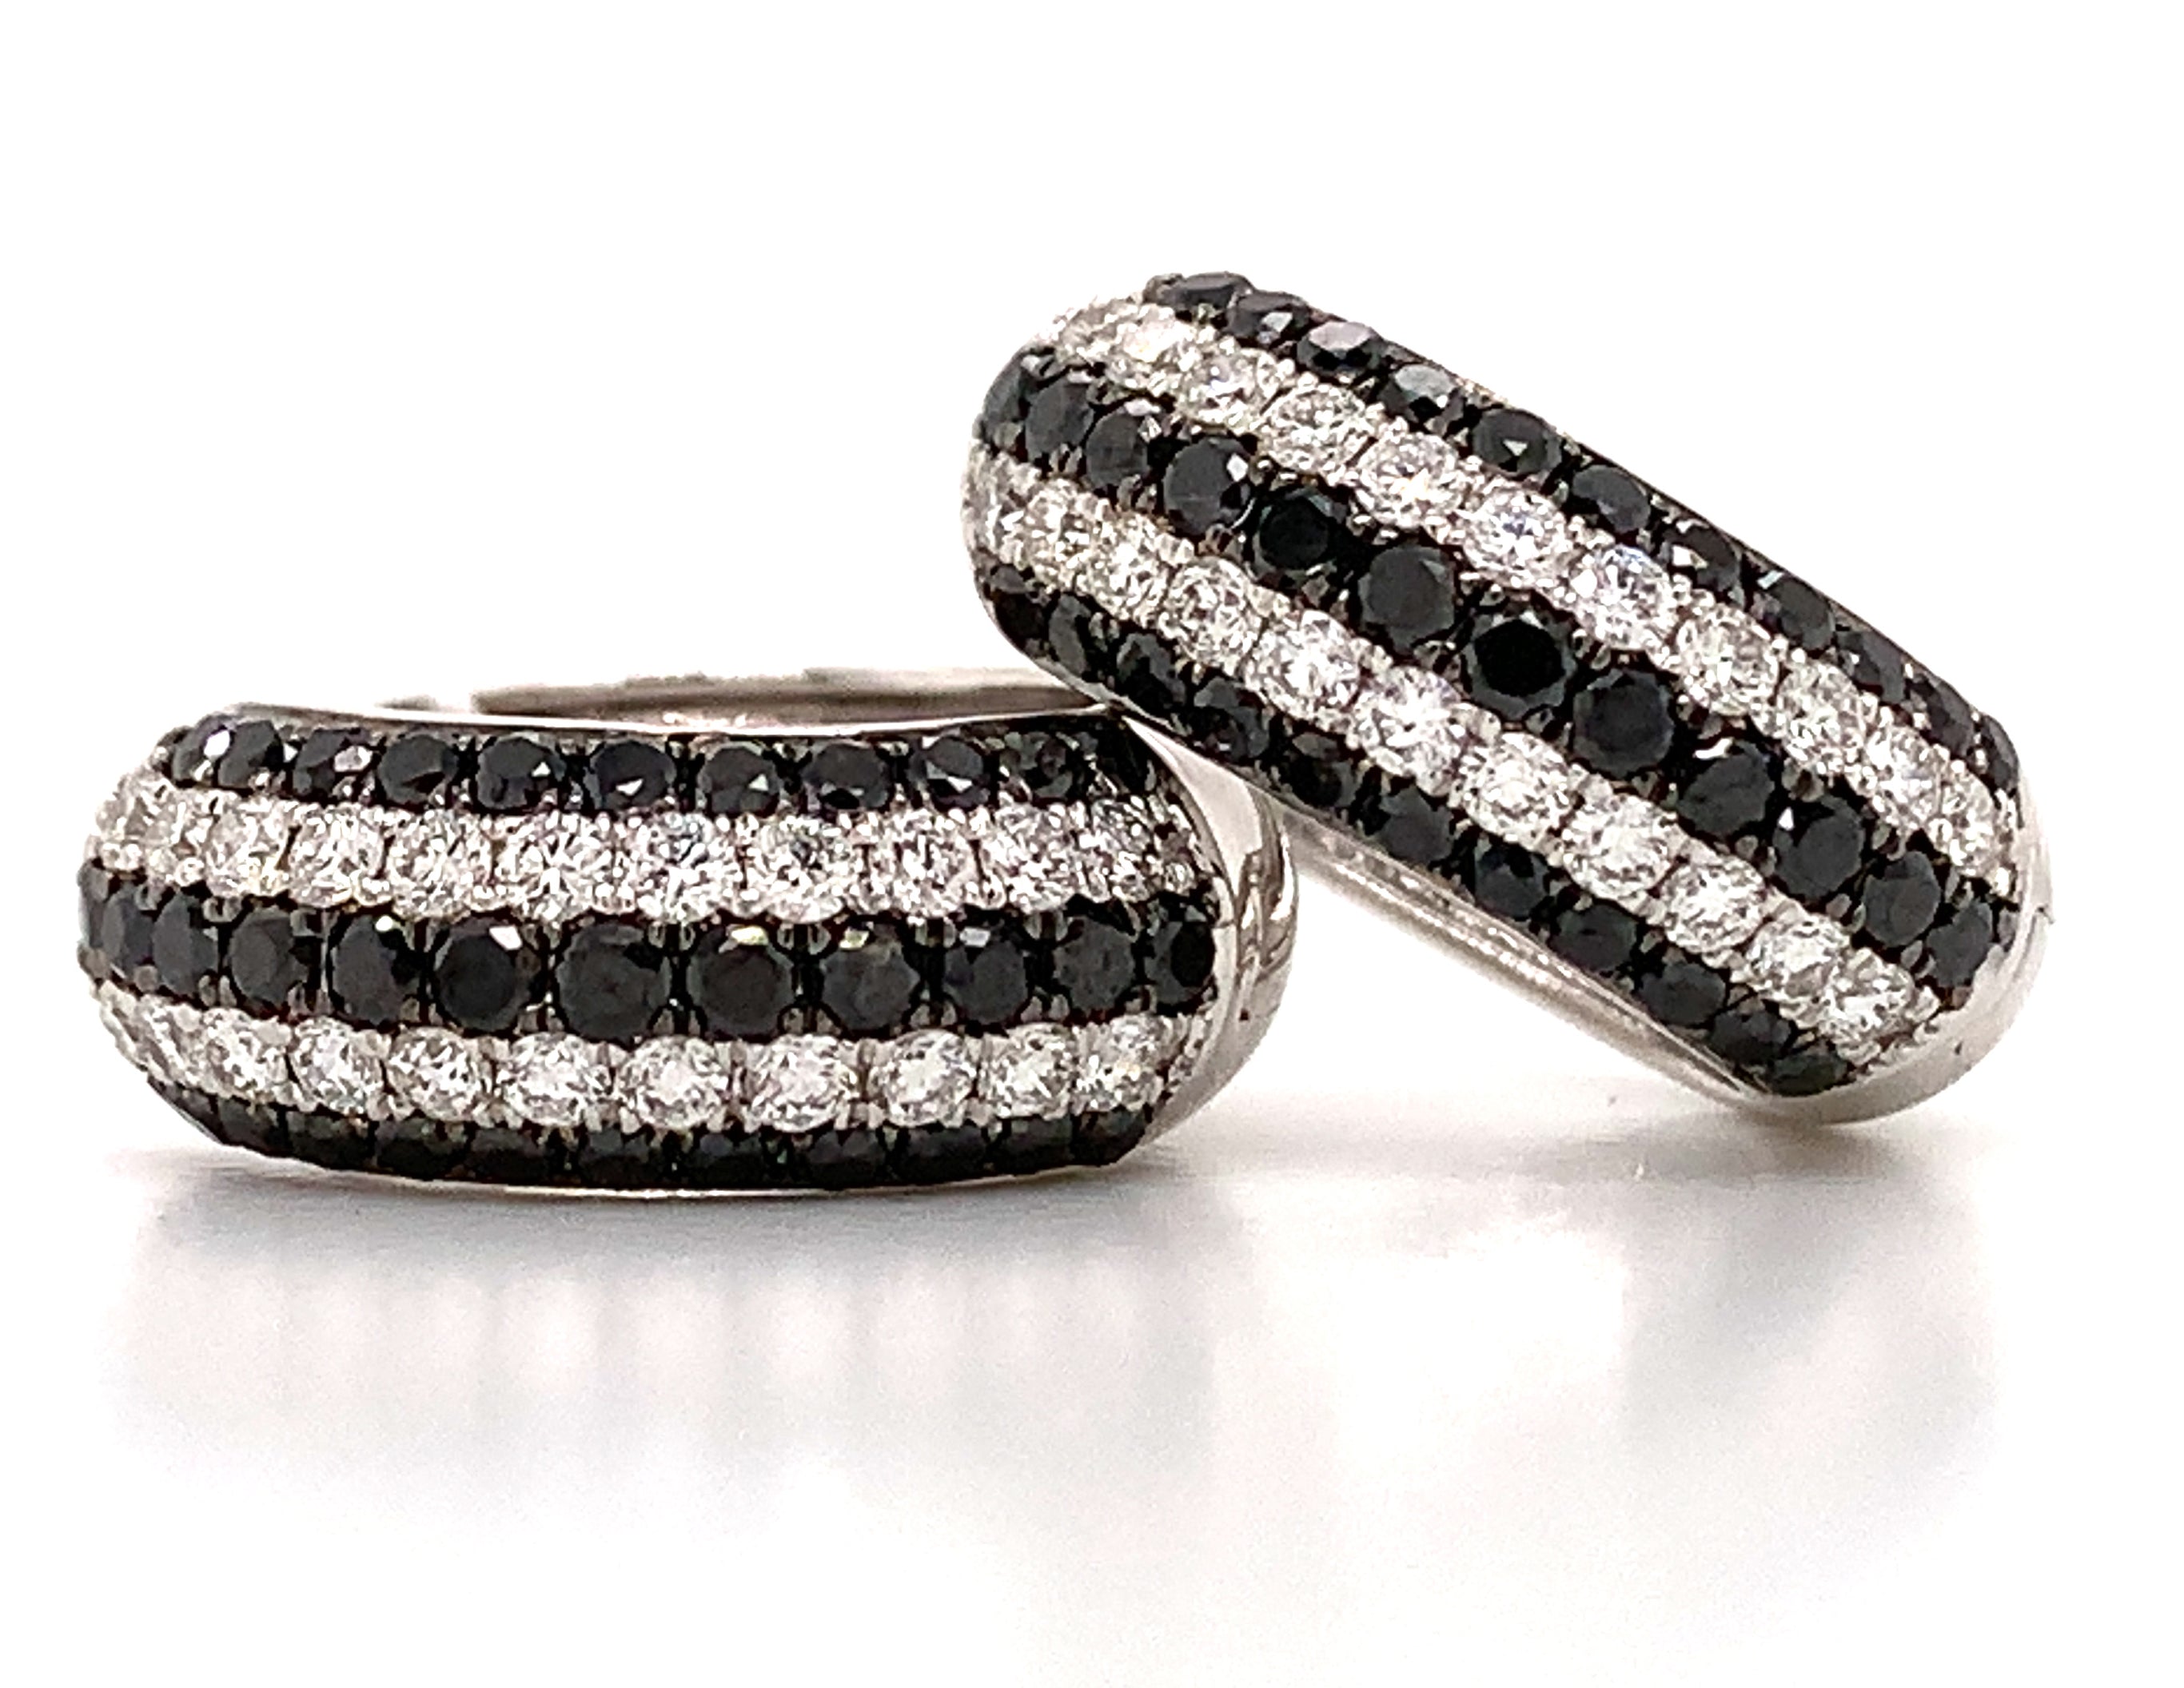 Five Row Pave Diamond White And Black Earrings 1.10ctw